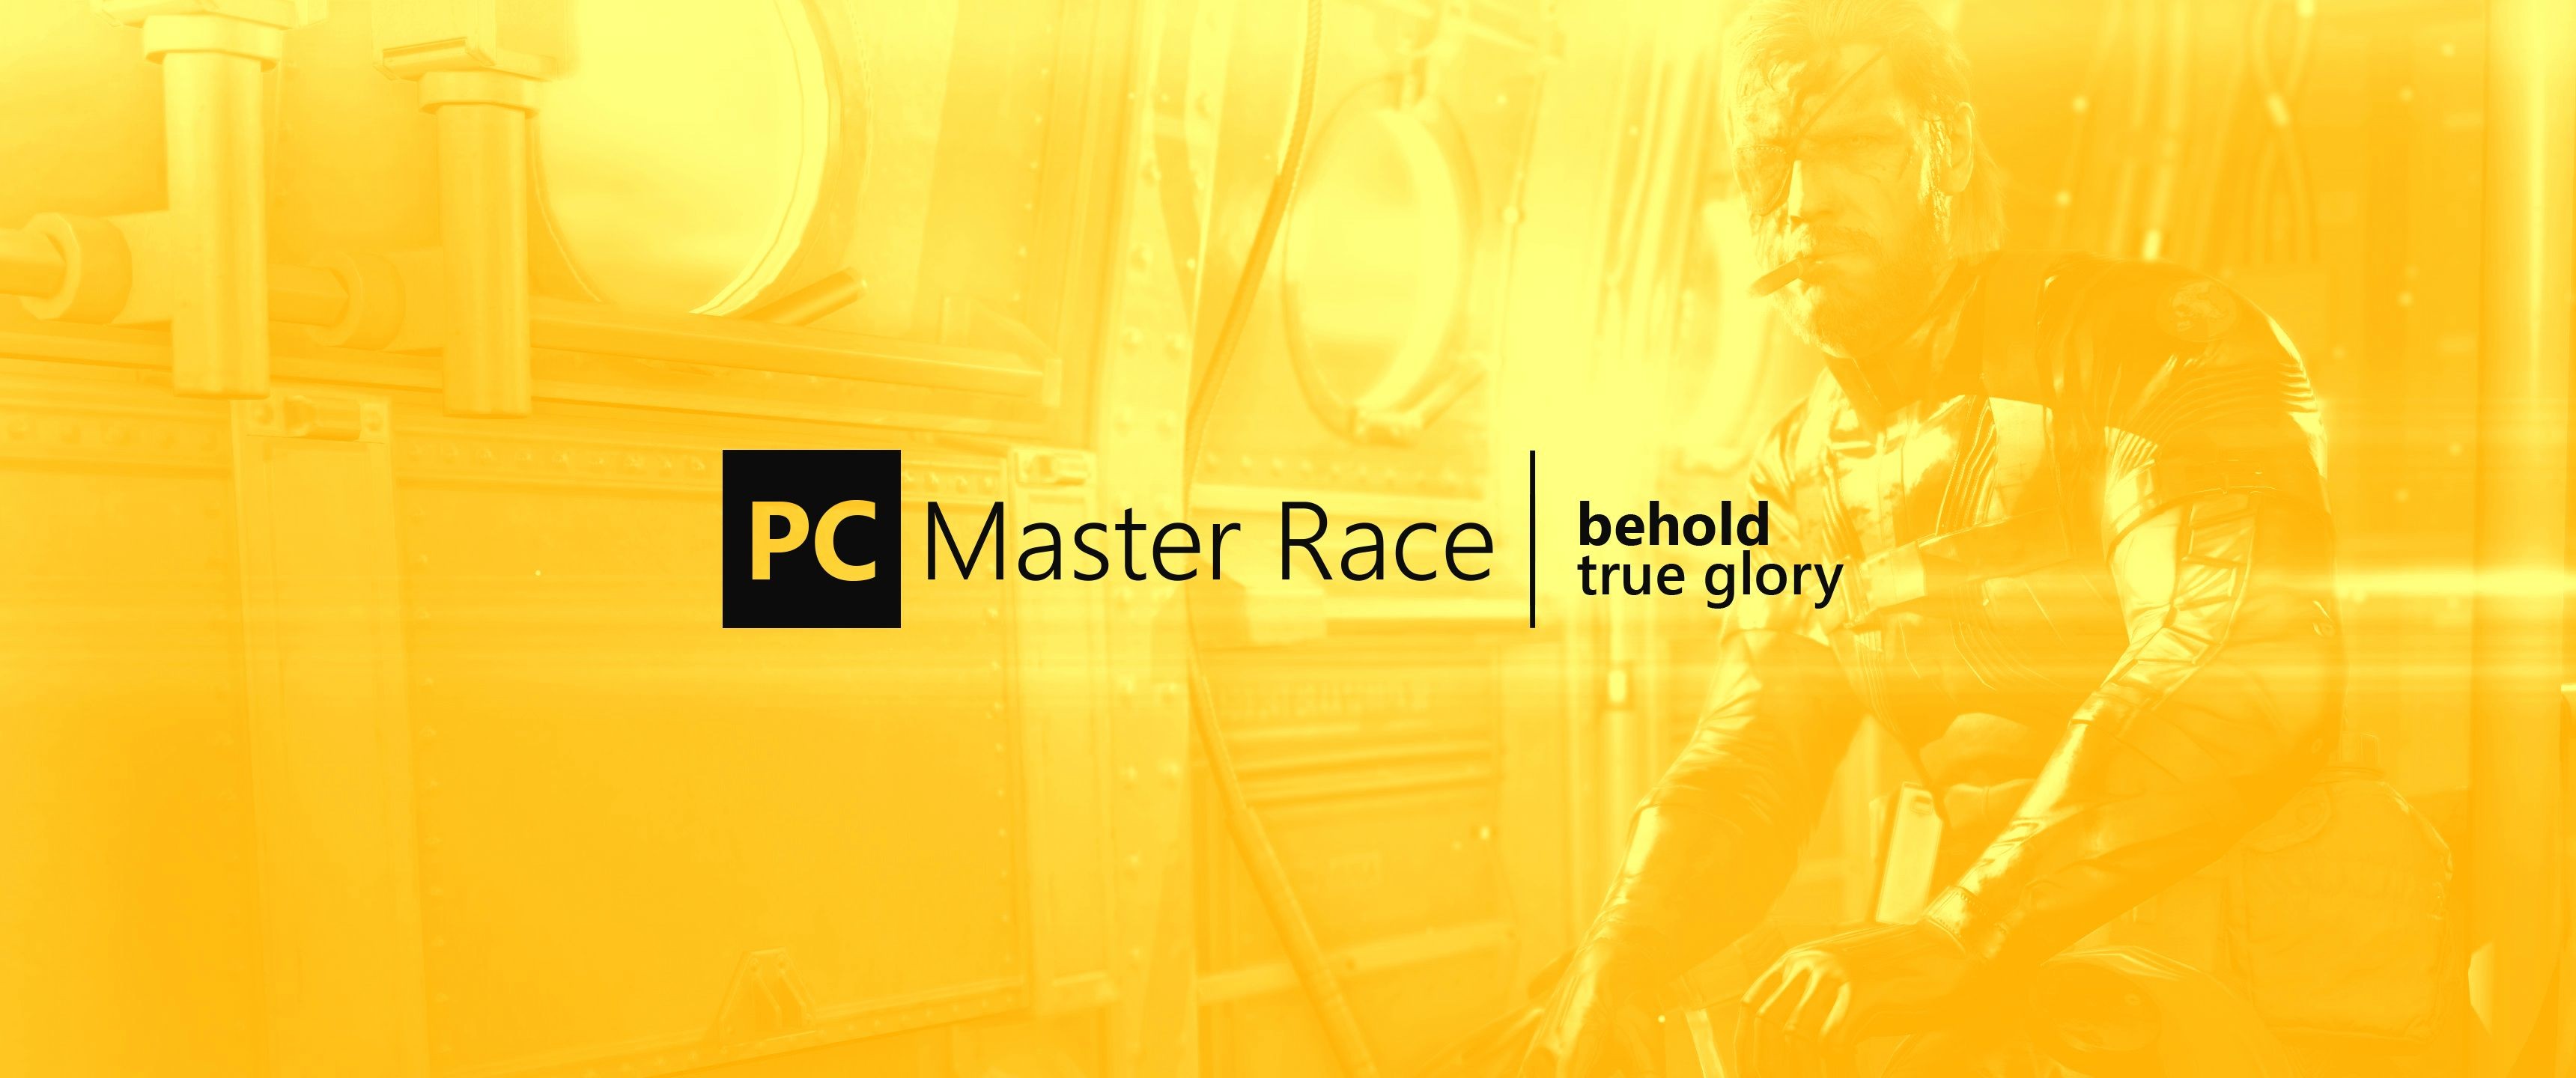 PC Gaming PC Master Race Yellow Background 3440x1440